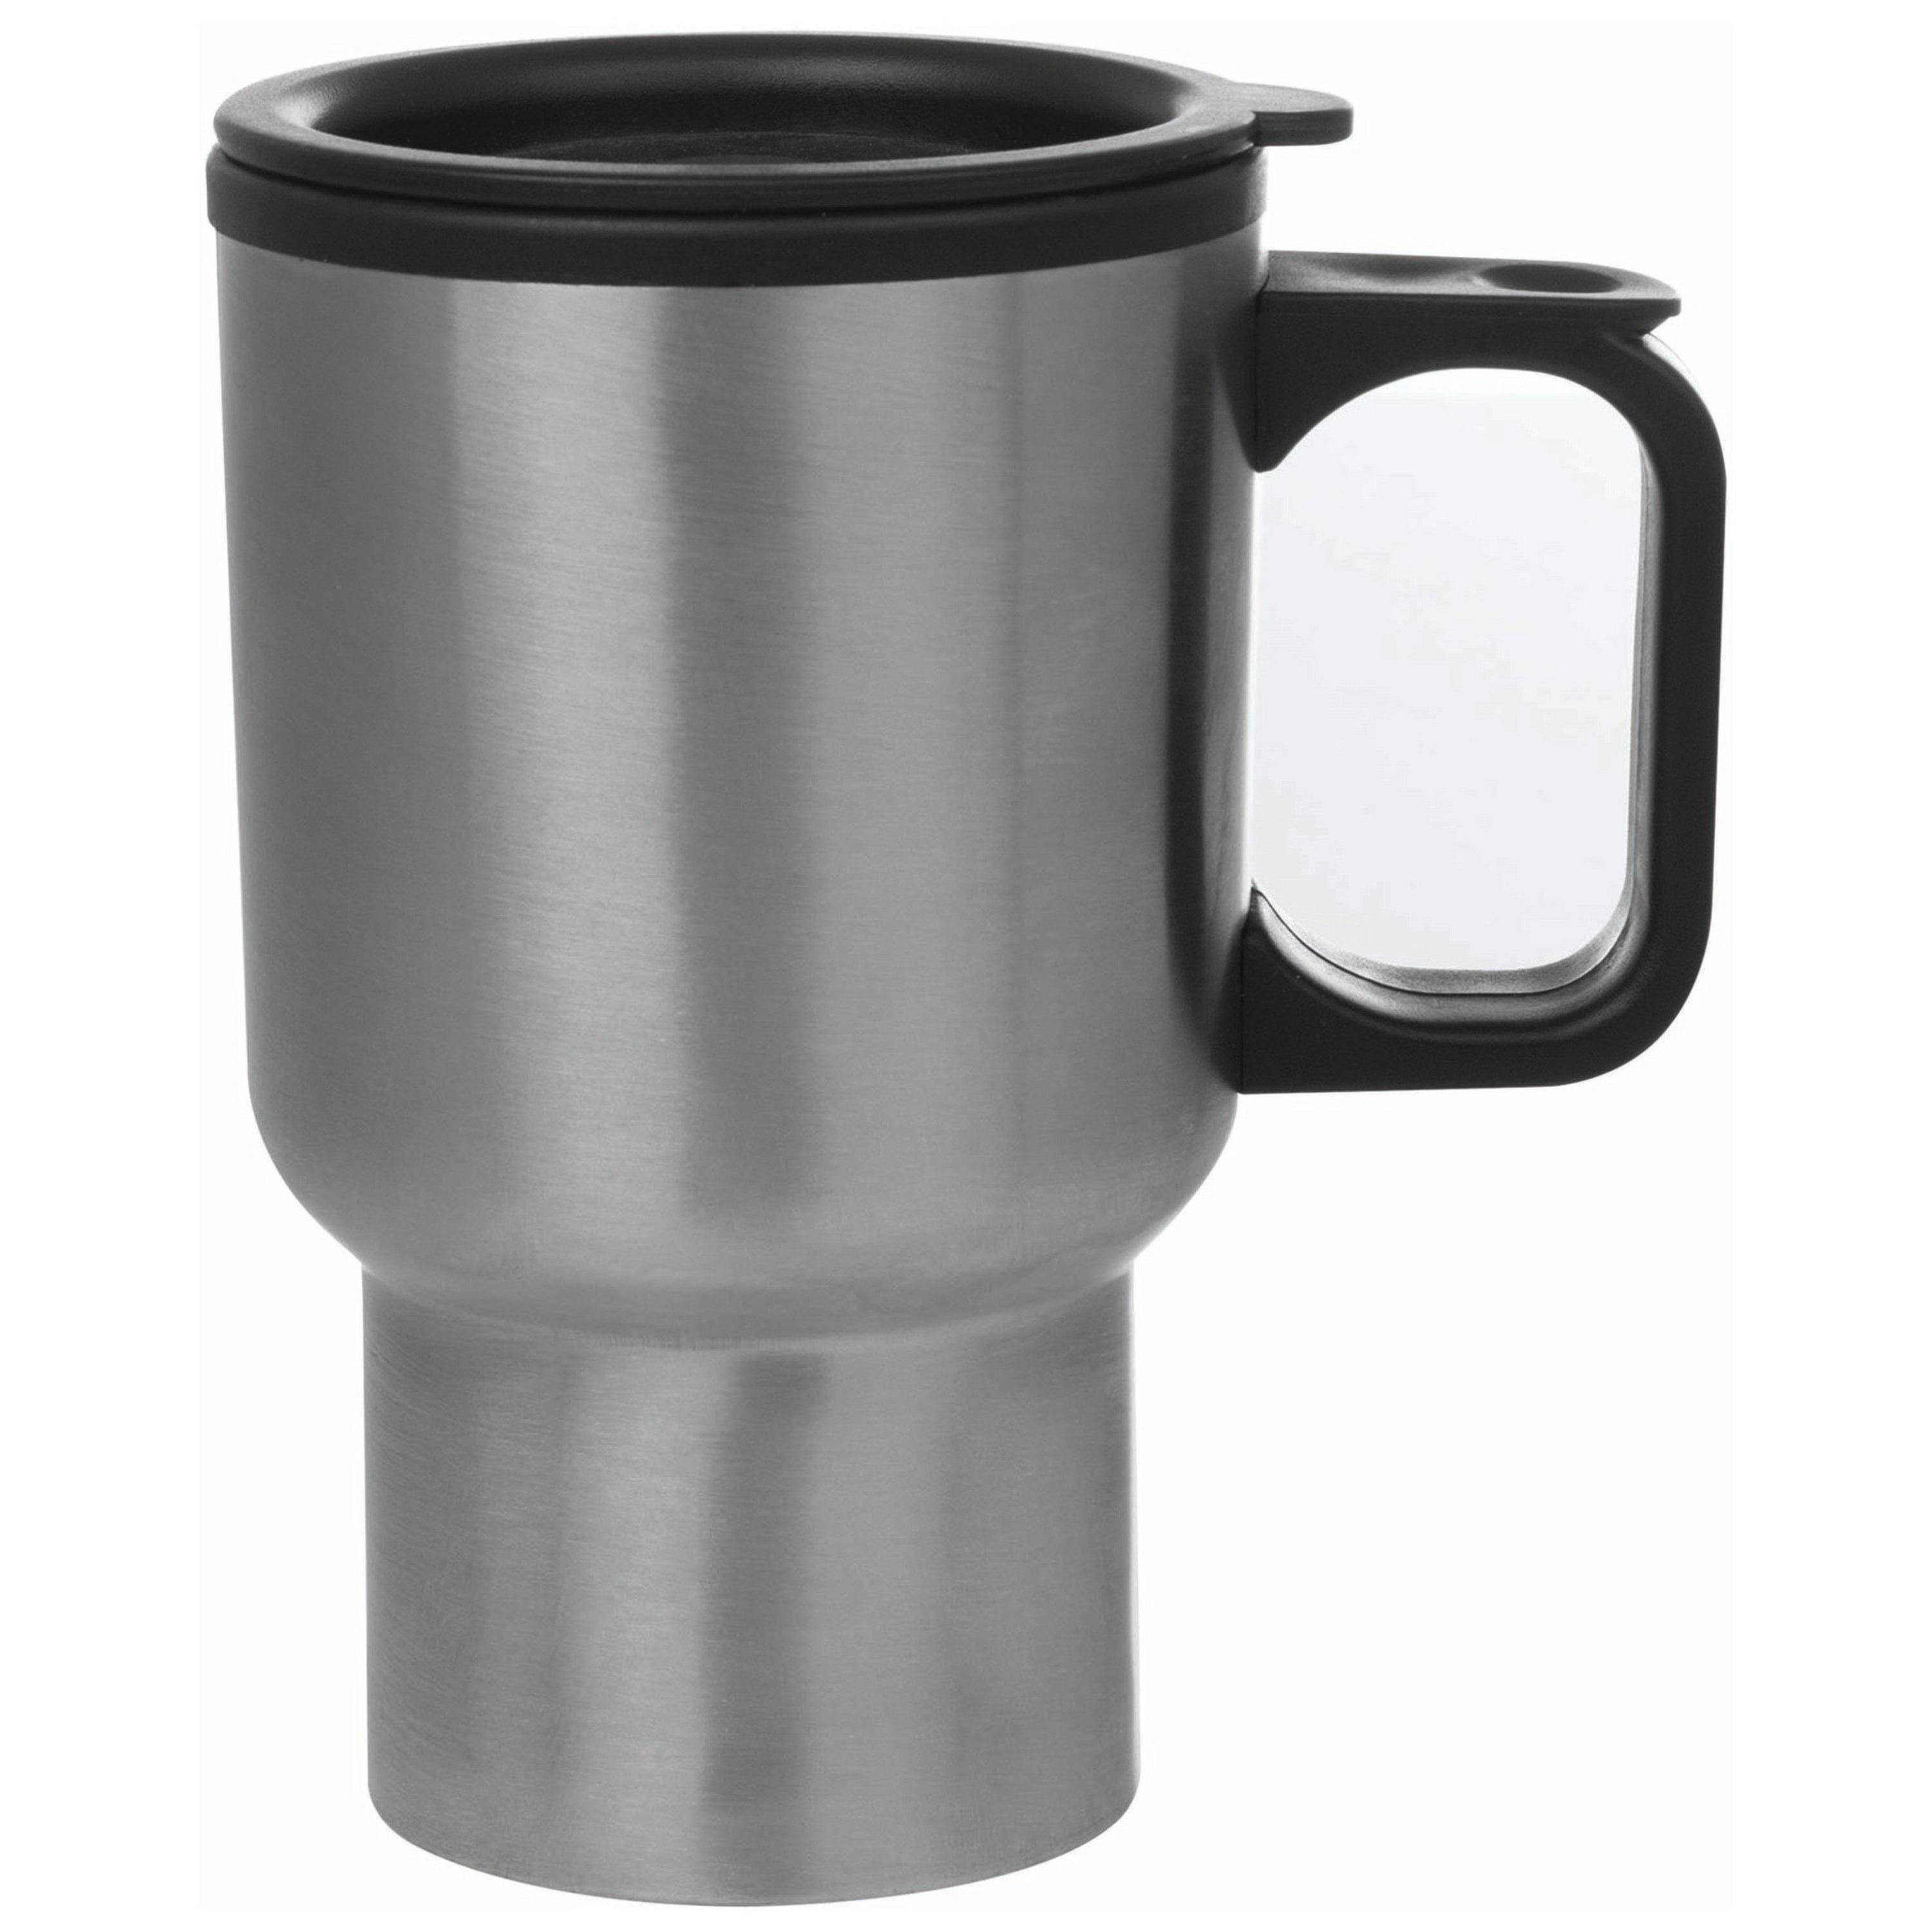 STAINLESS STEEL TRAVEL MUG NO HANDLE 16 OZ JEEP OR JEEP GRILL 